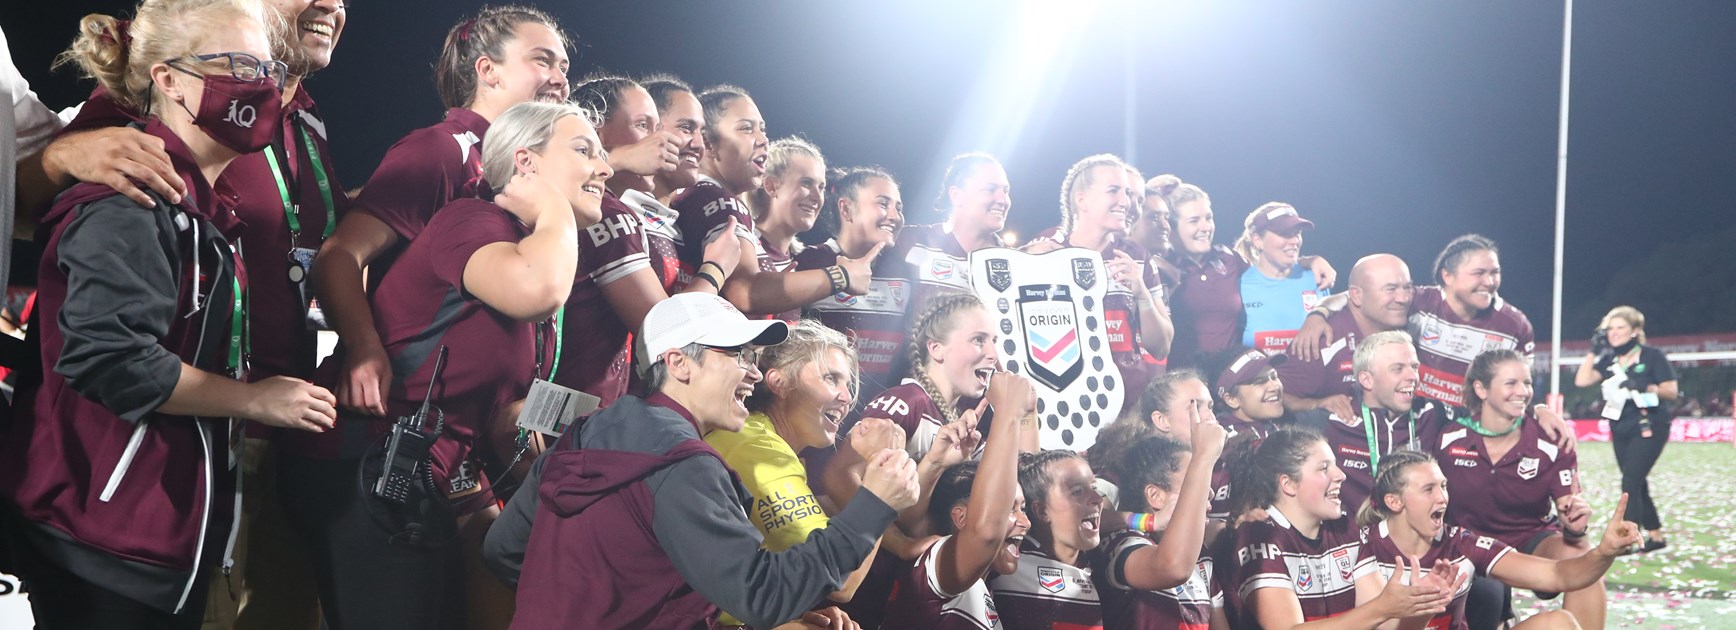 Maroons want another Origin clash on home soil